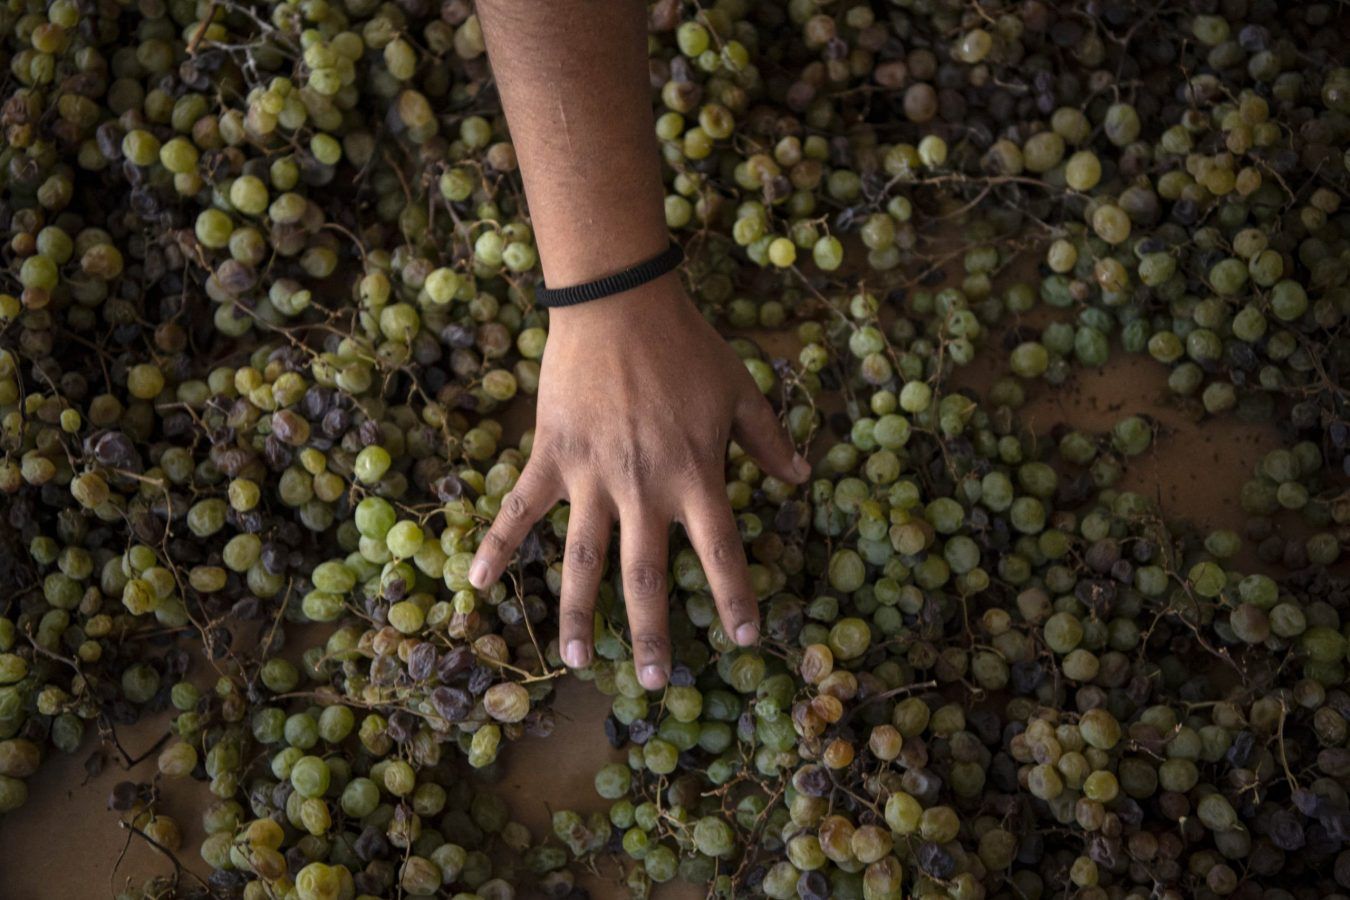 Why and how wine producers are growing grapes in the world’s driest desert